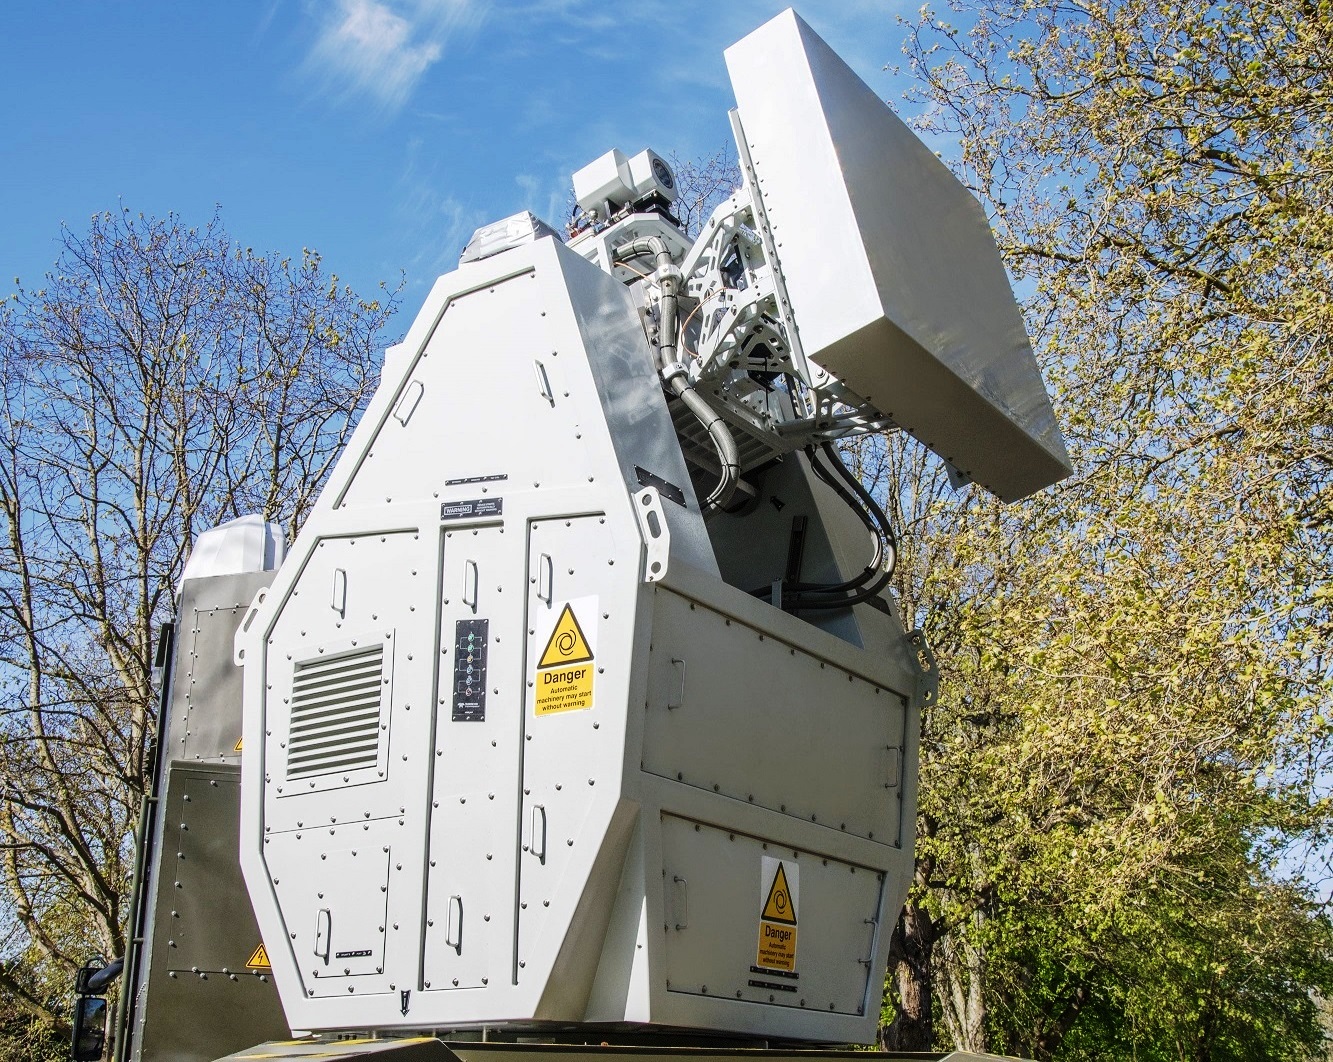 Radio wave weapon being developed for UK armed forces